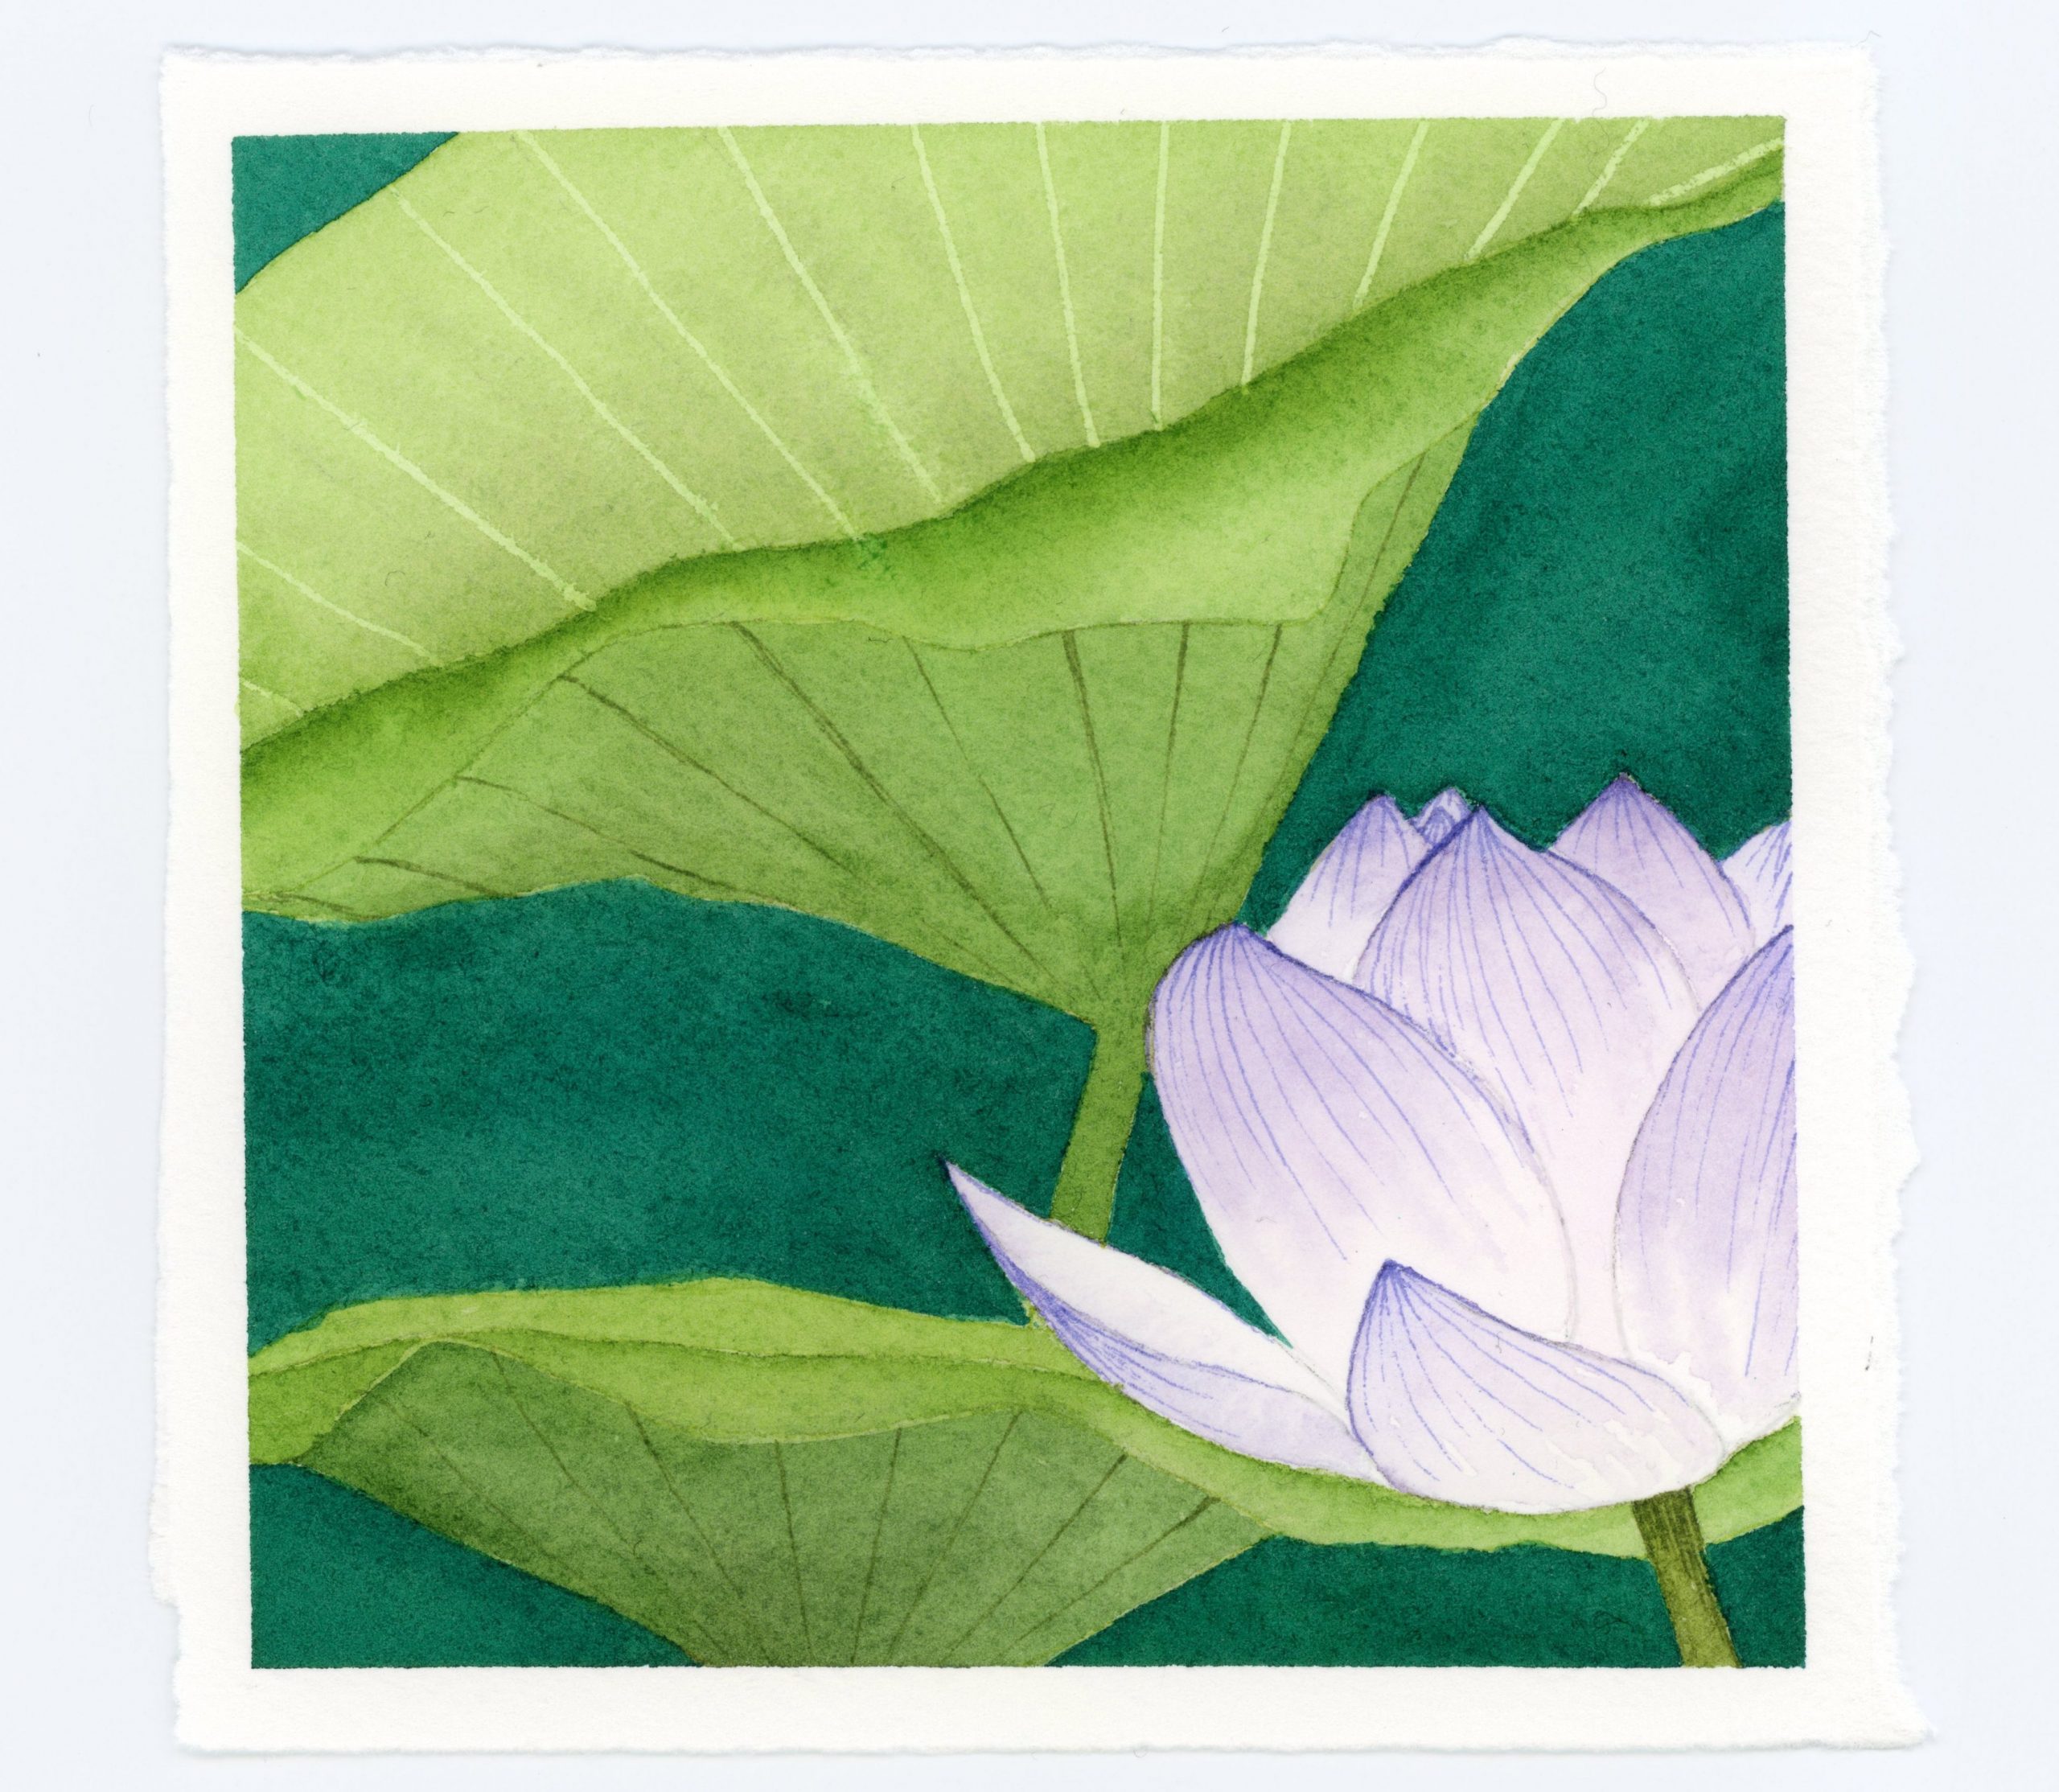 Waterlily watercolor and ink illustration